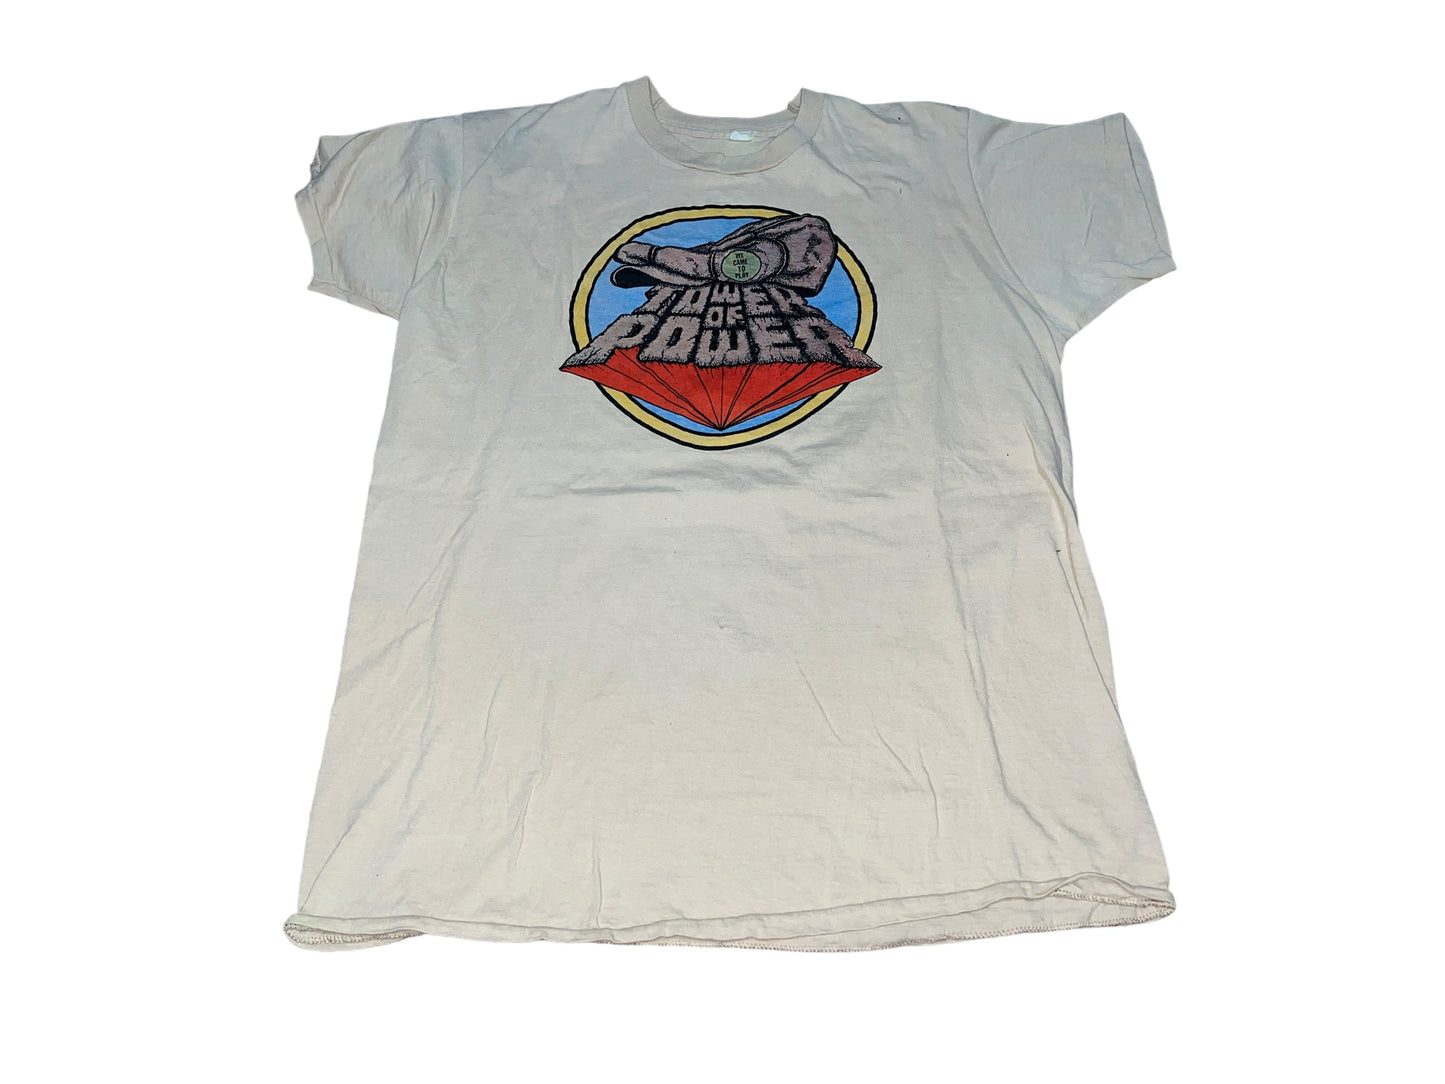 Vintage 70's Tower of Power T-Shirt